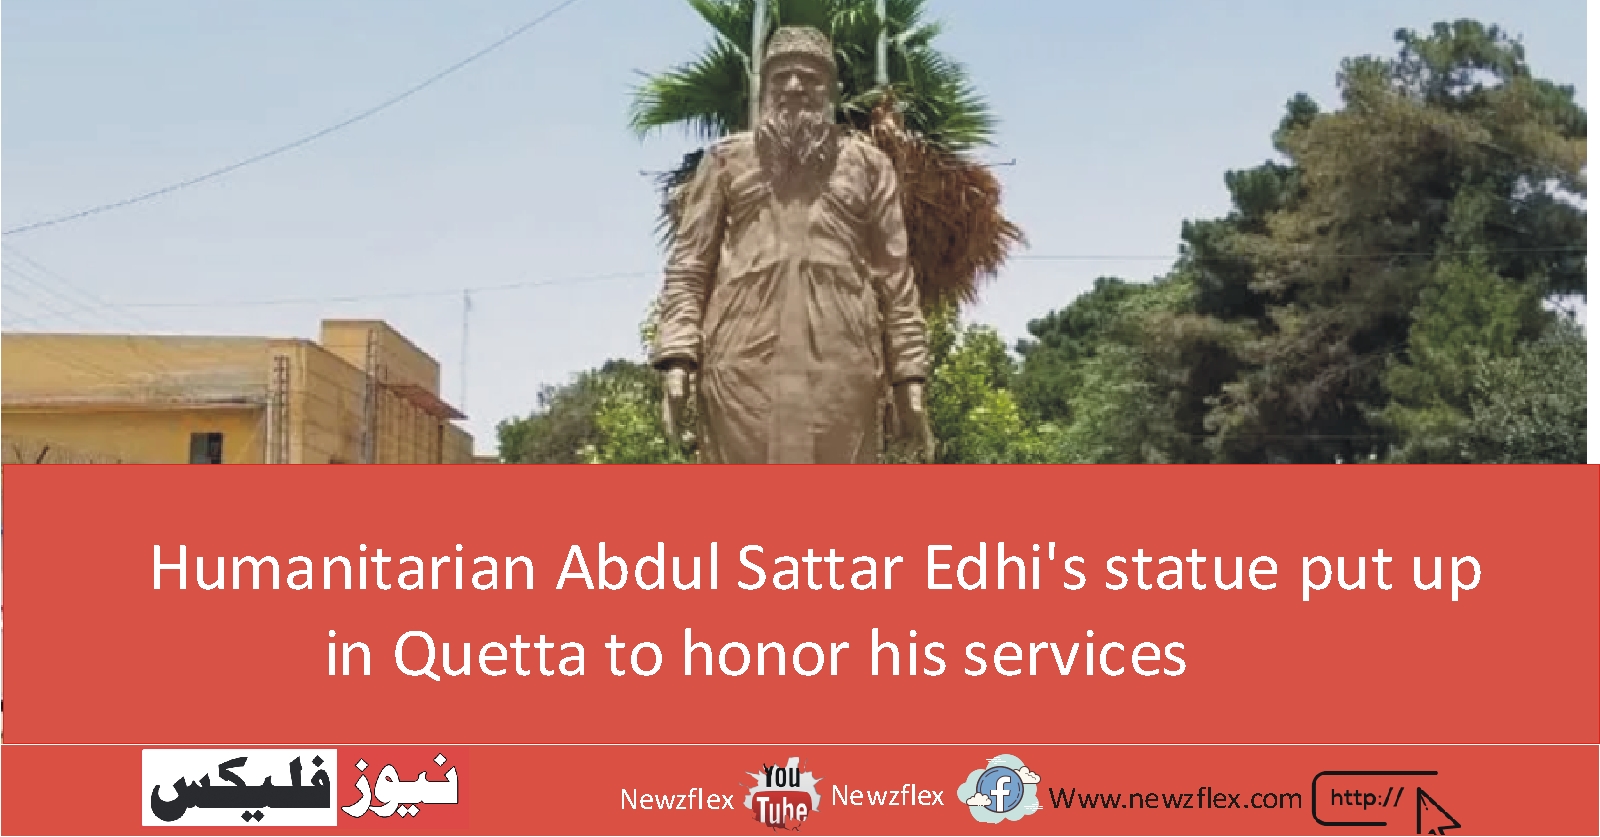 Humanitarian Abdul Sattar Edhi's statue put up in Quetta to honor his services